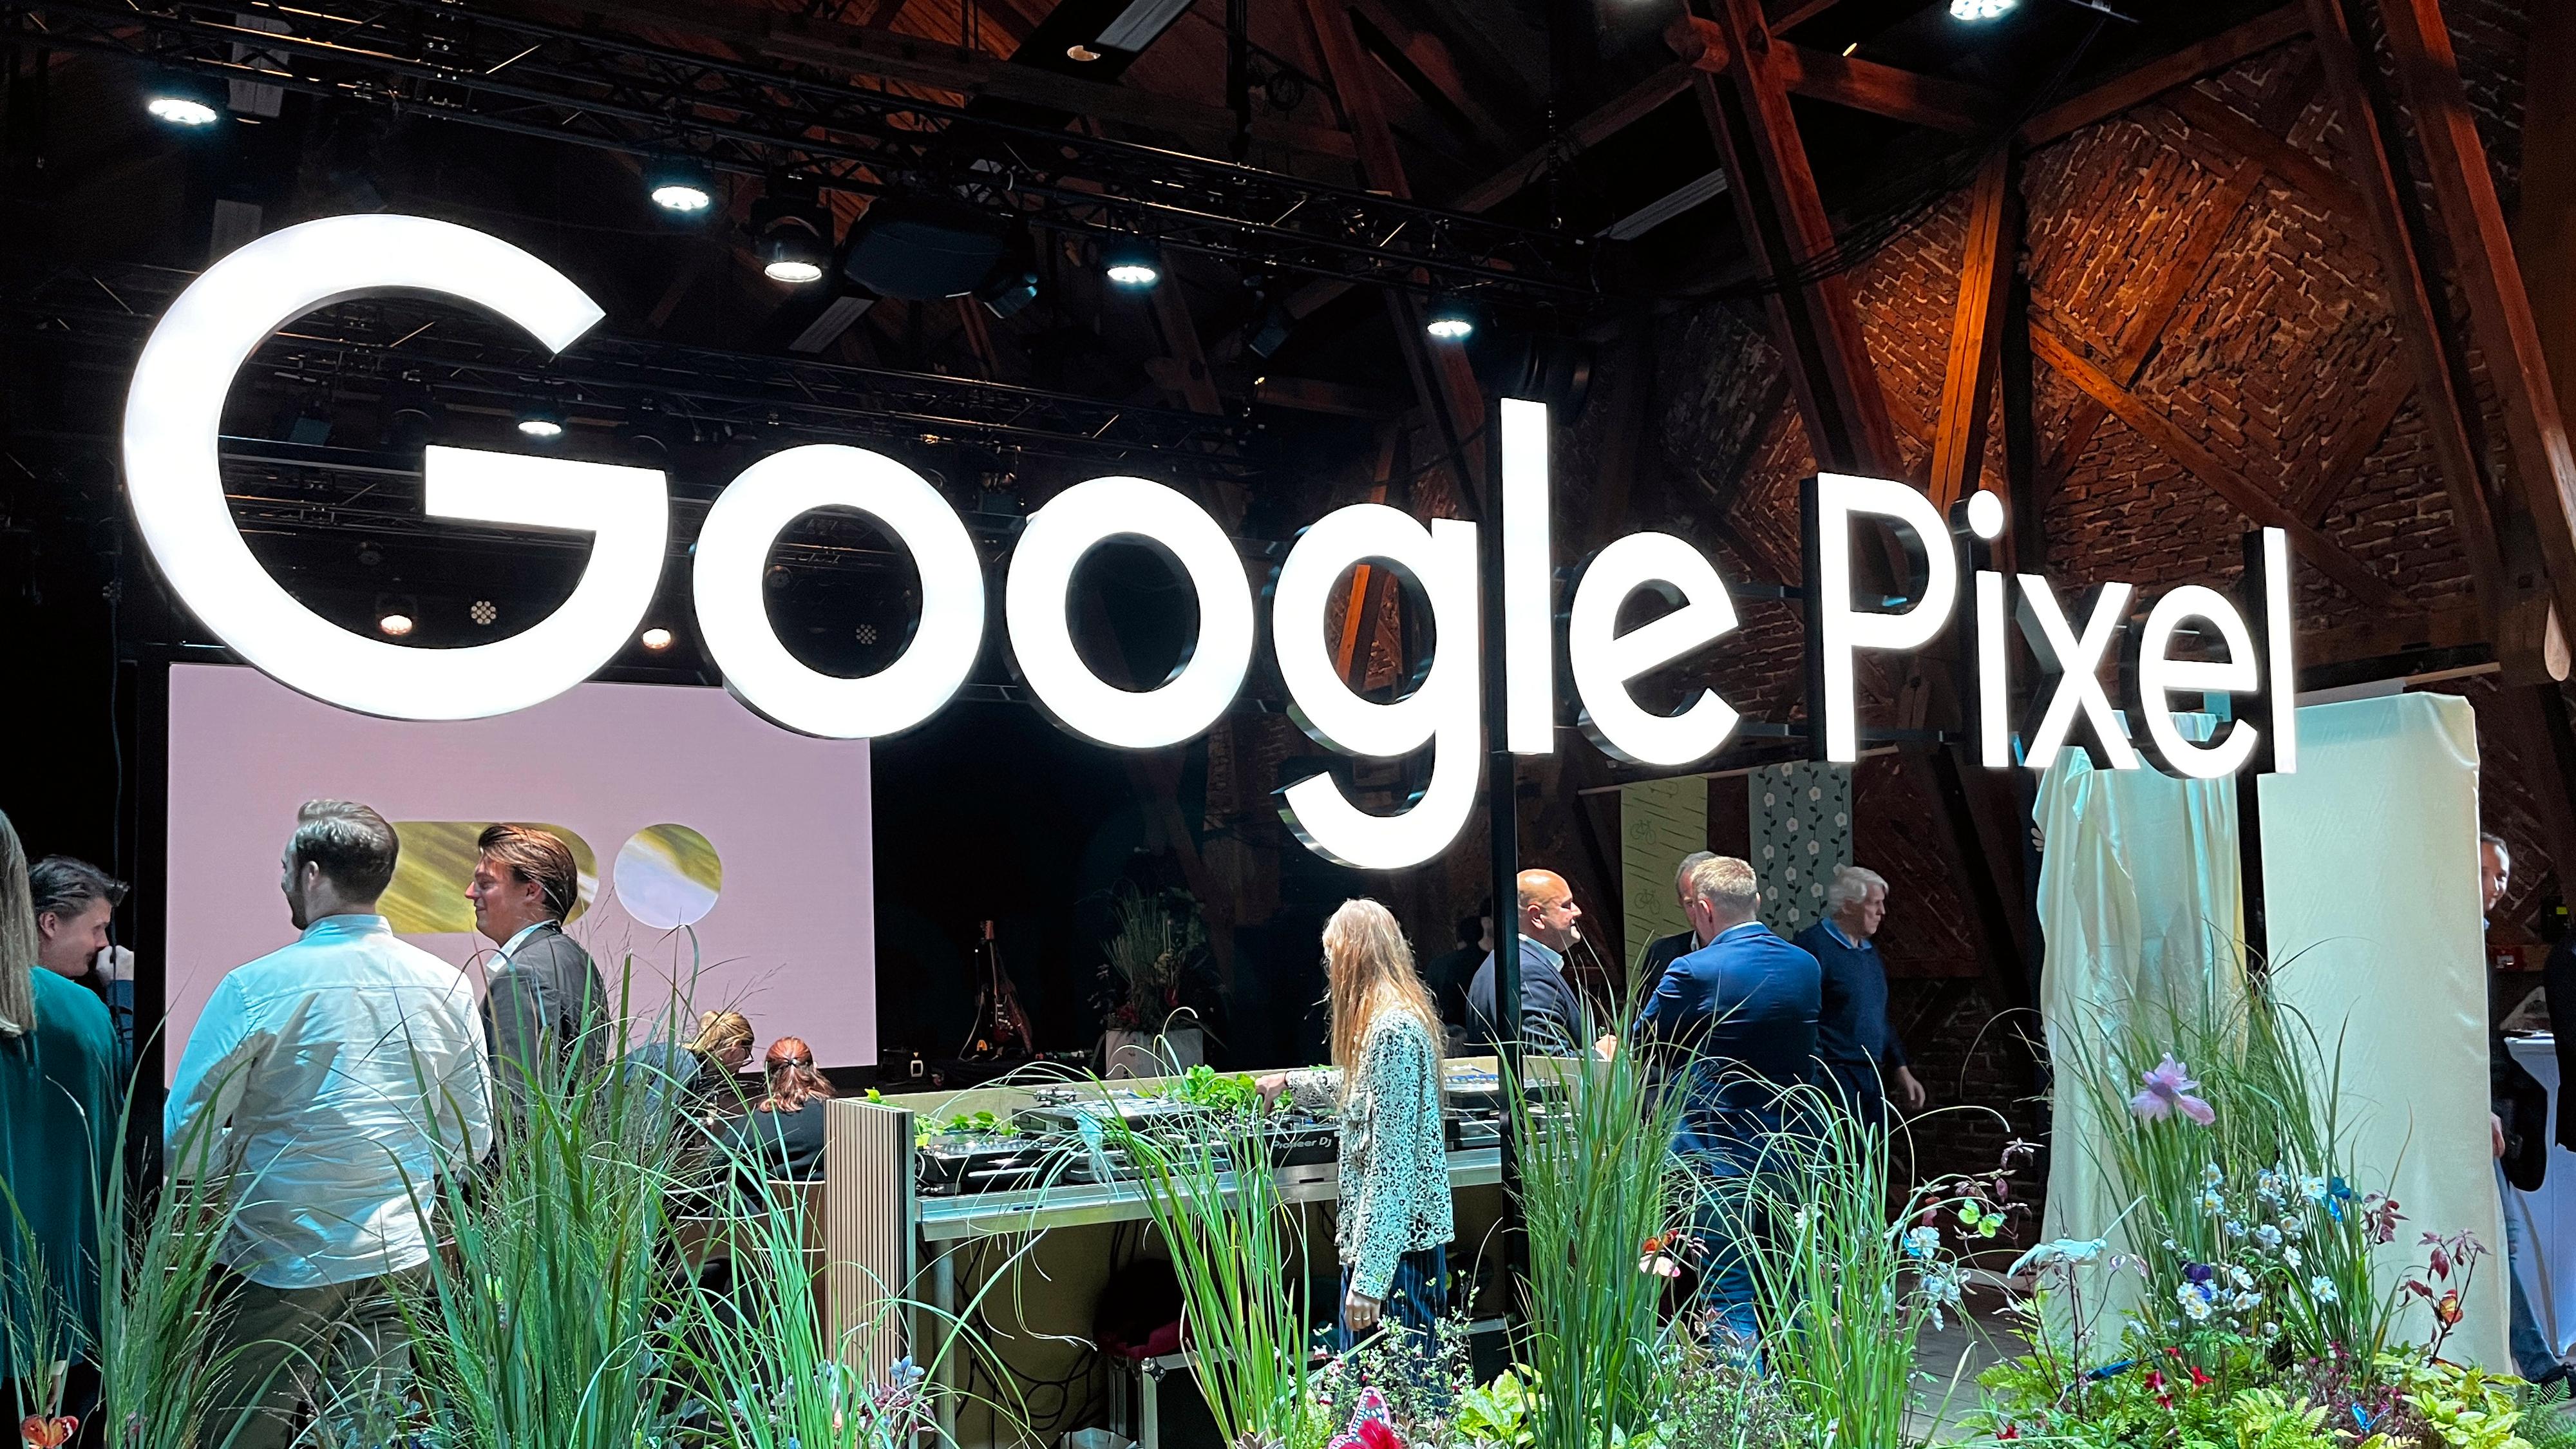 Google had called a large-scale and touching launch event in Oslo on Thursday, to mark the Norwegian launch of the Pixel. 